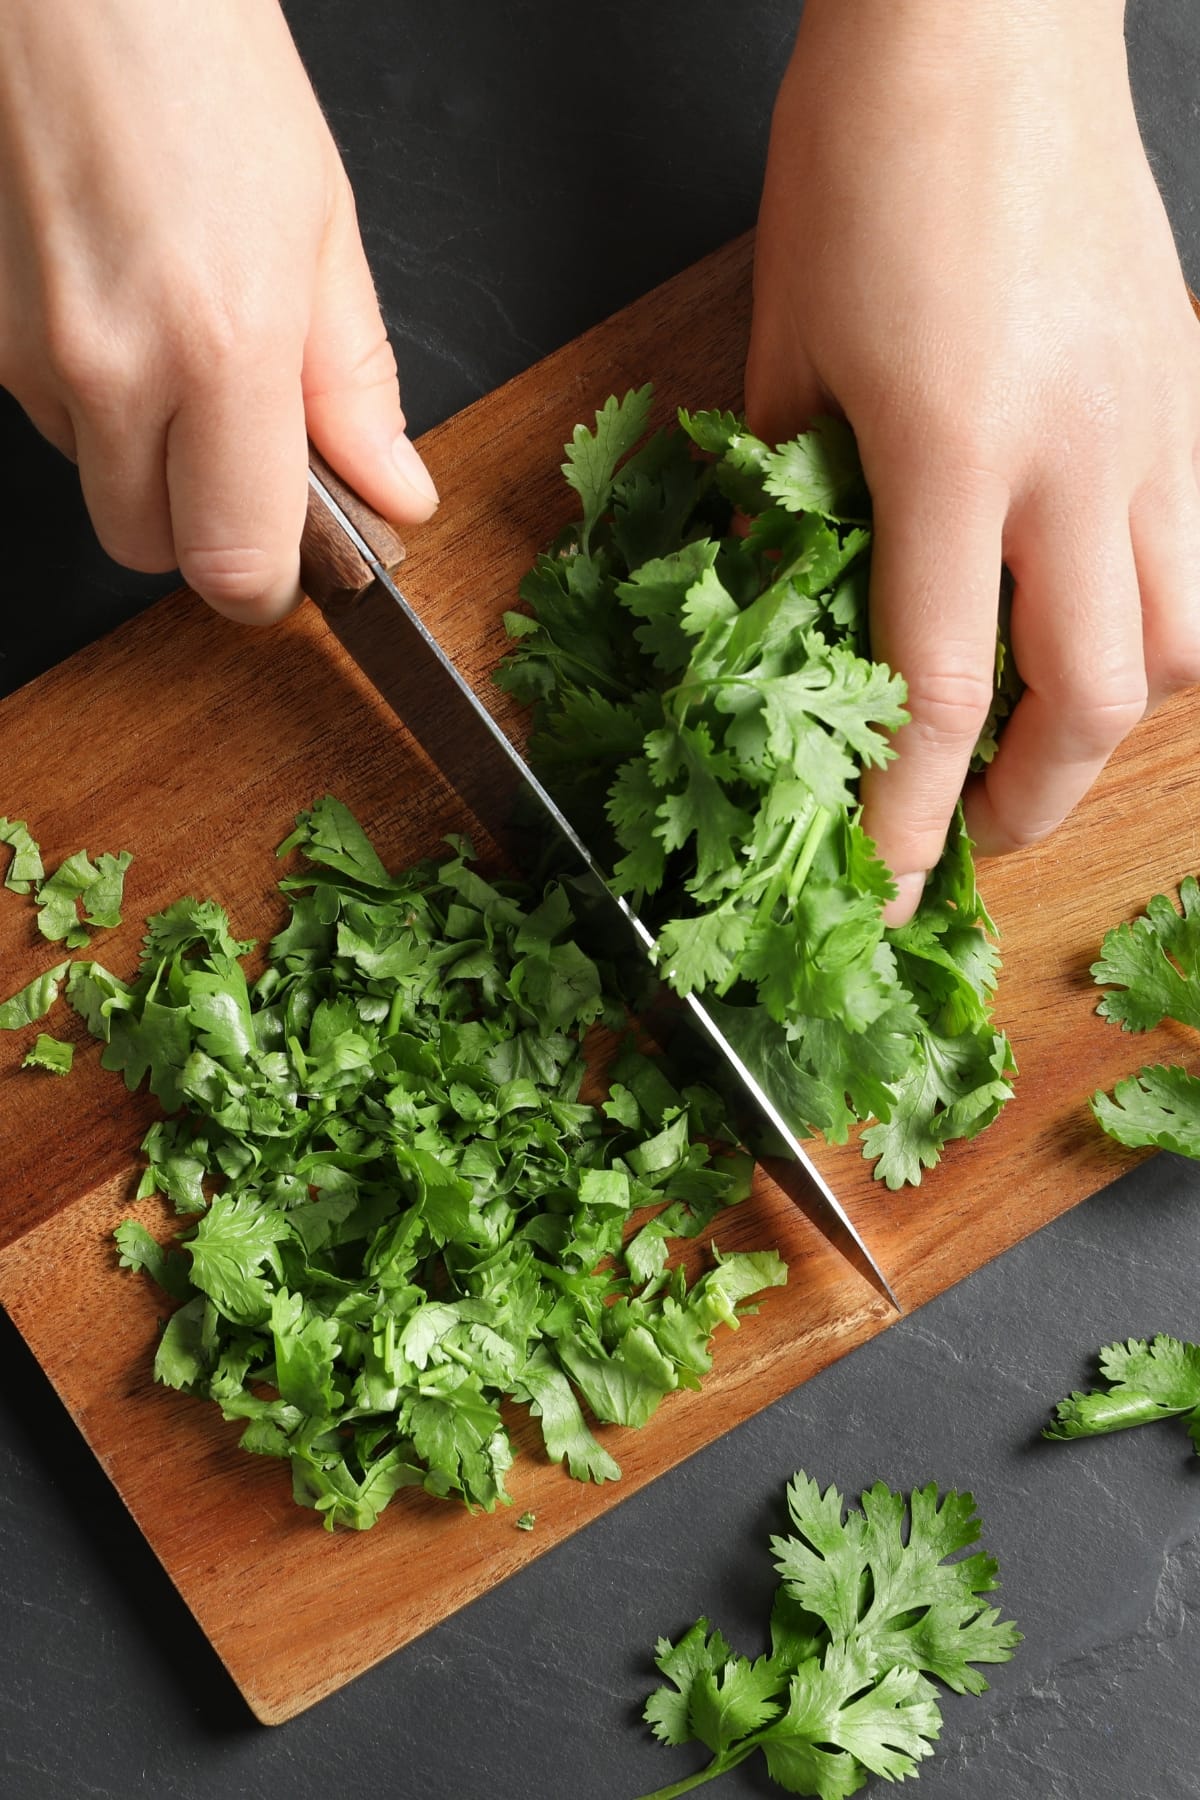 Chopping Green Cilantro on a Wooden Board